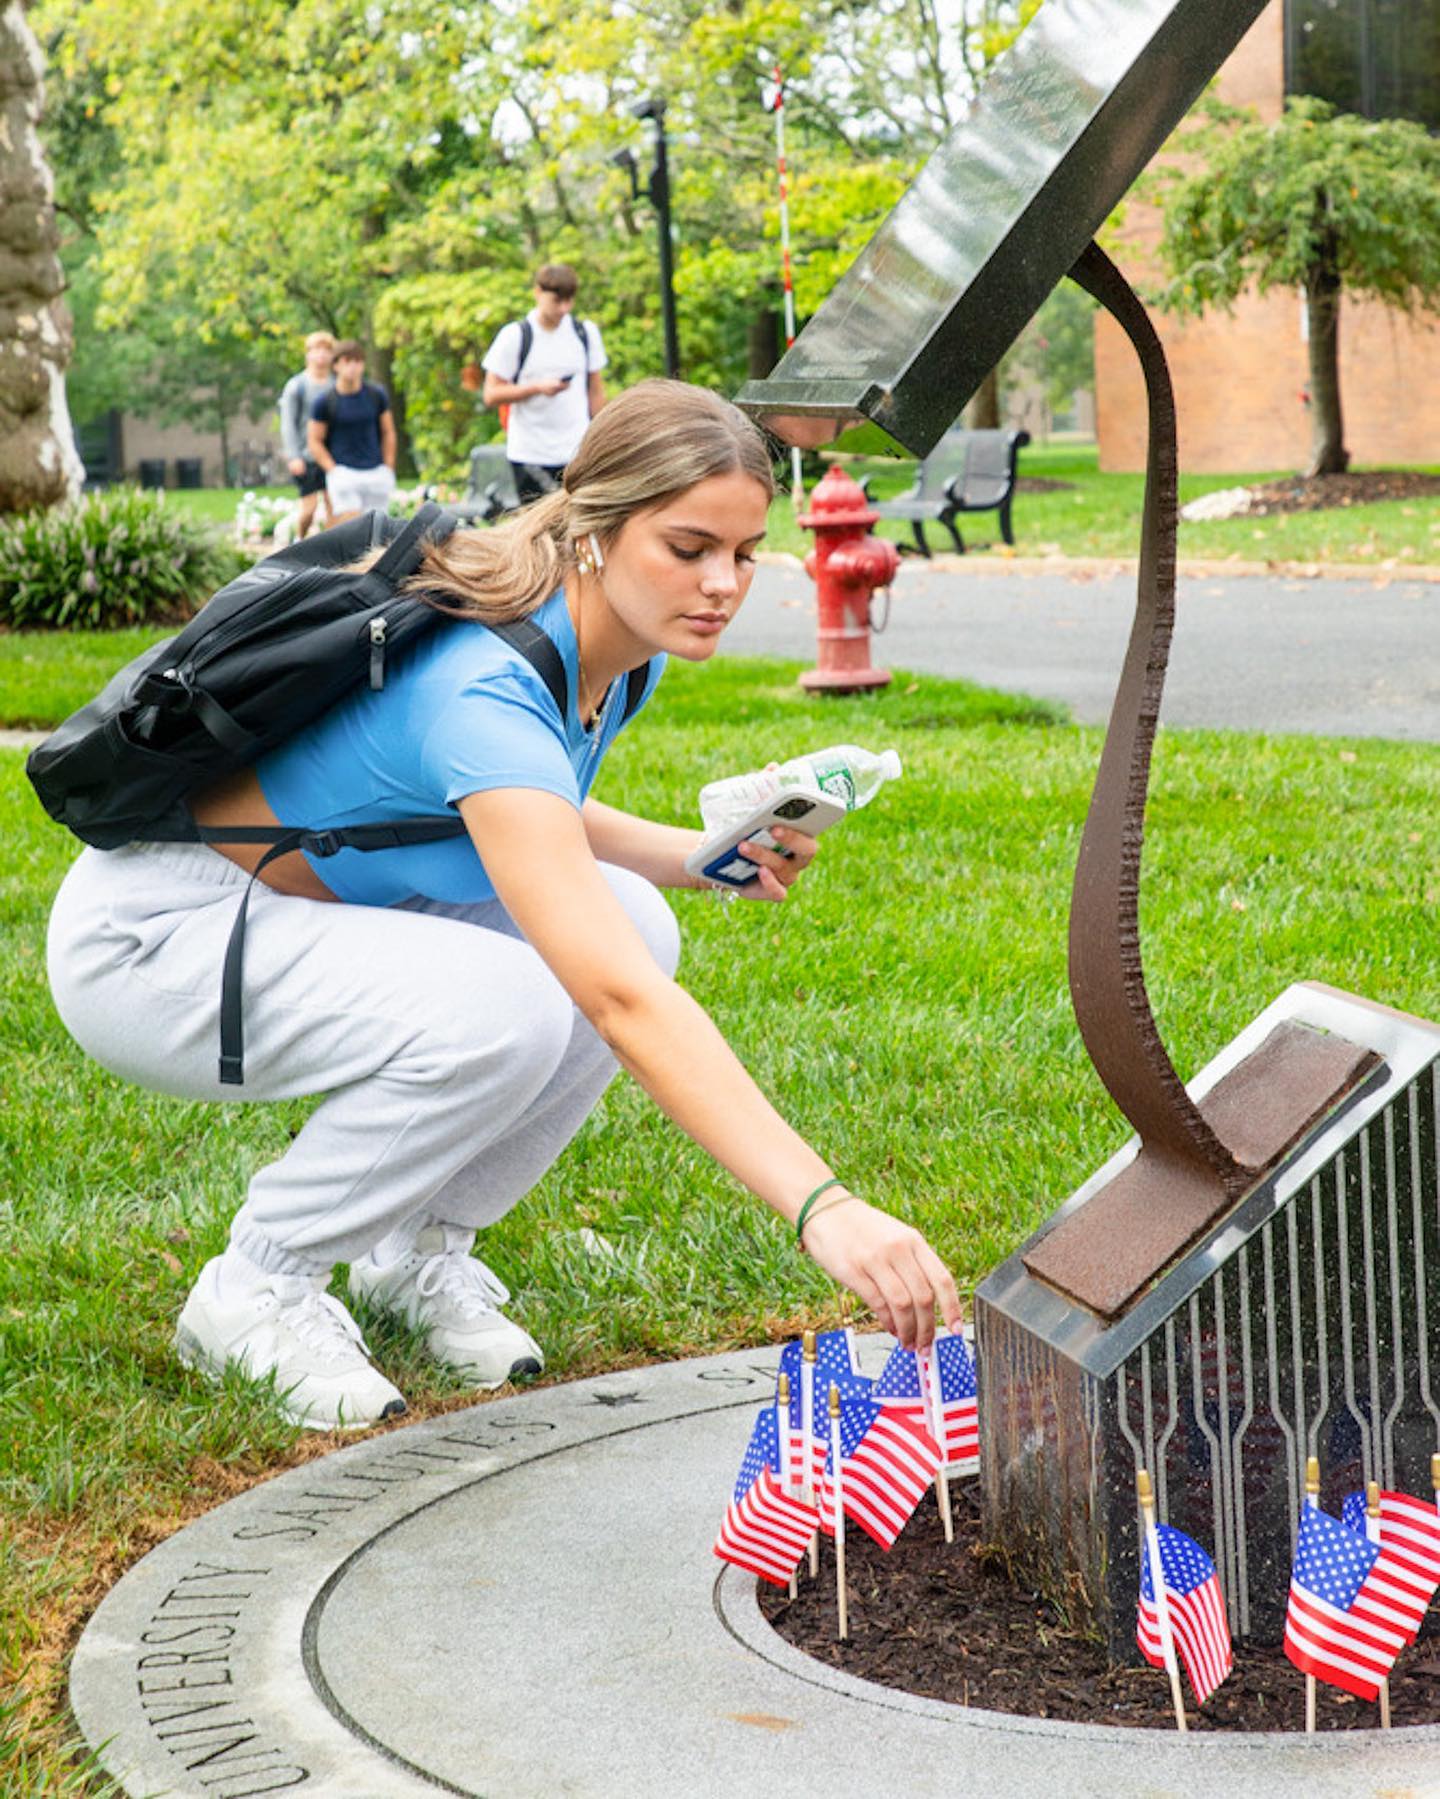 Remembering 9/11. 🇺🇸 #MonmouthU unites in a tribute at our 9/11 Memorial, planting flags to honor […]